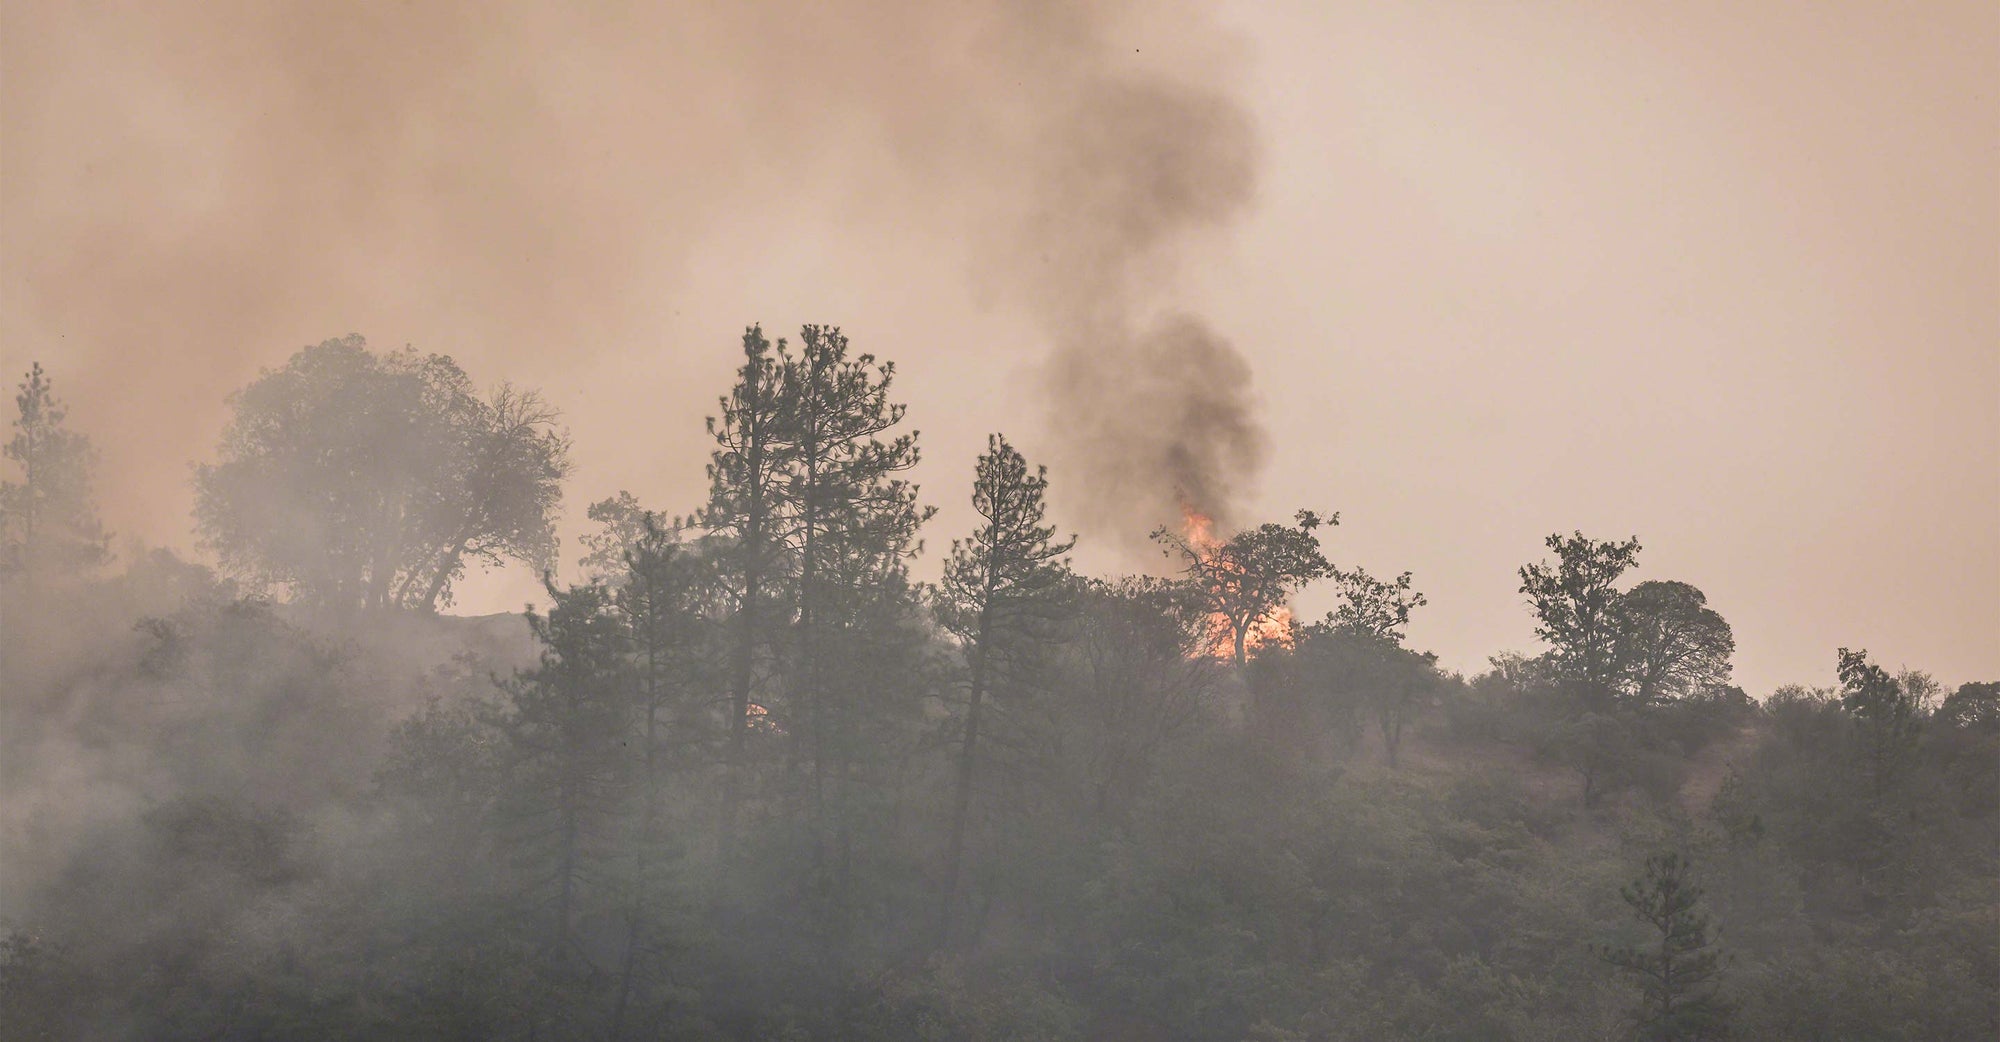 Smoke rising as trees burn below forest canopy